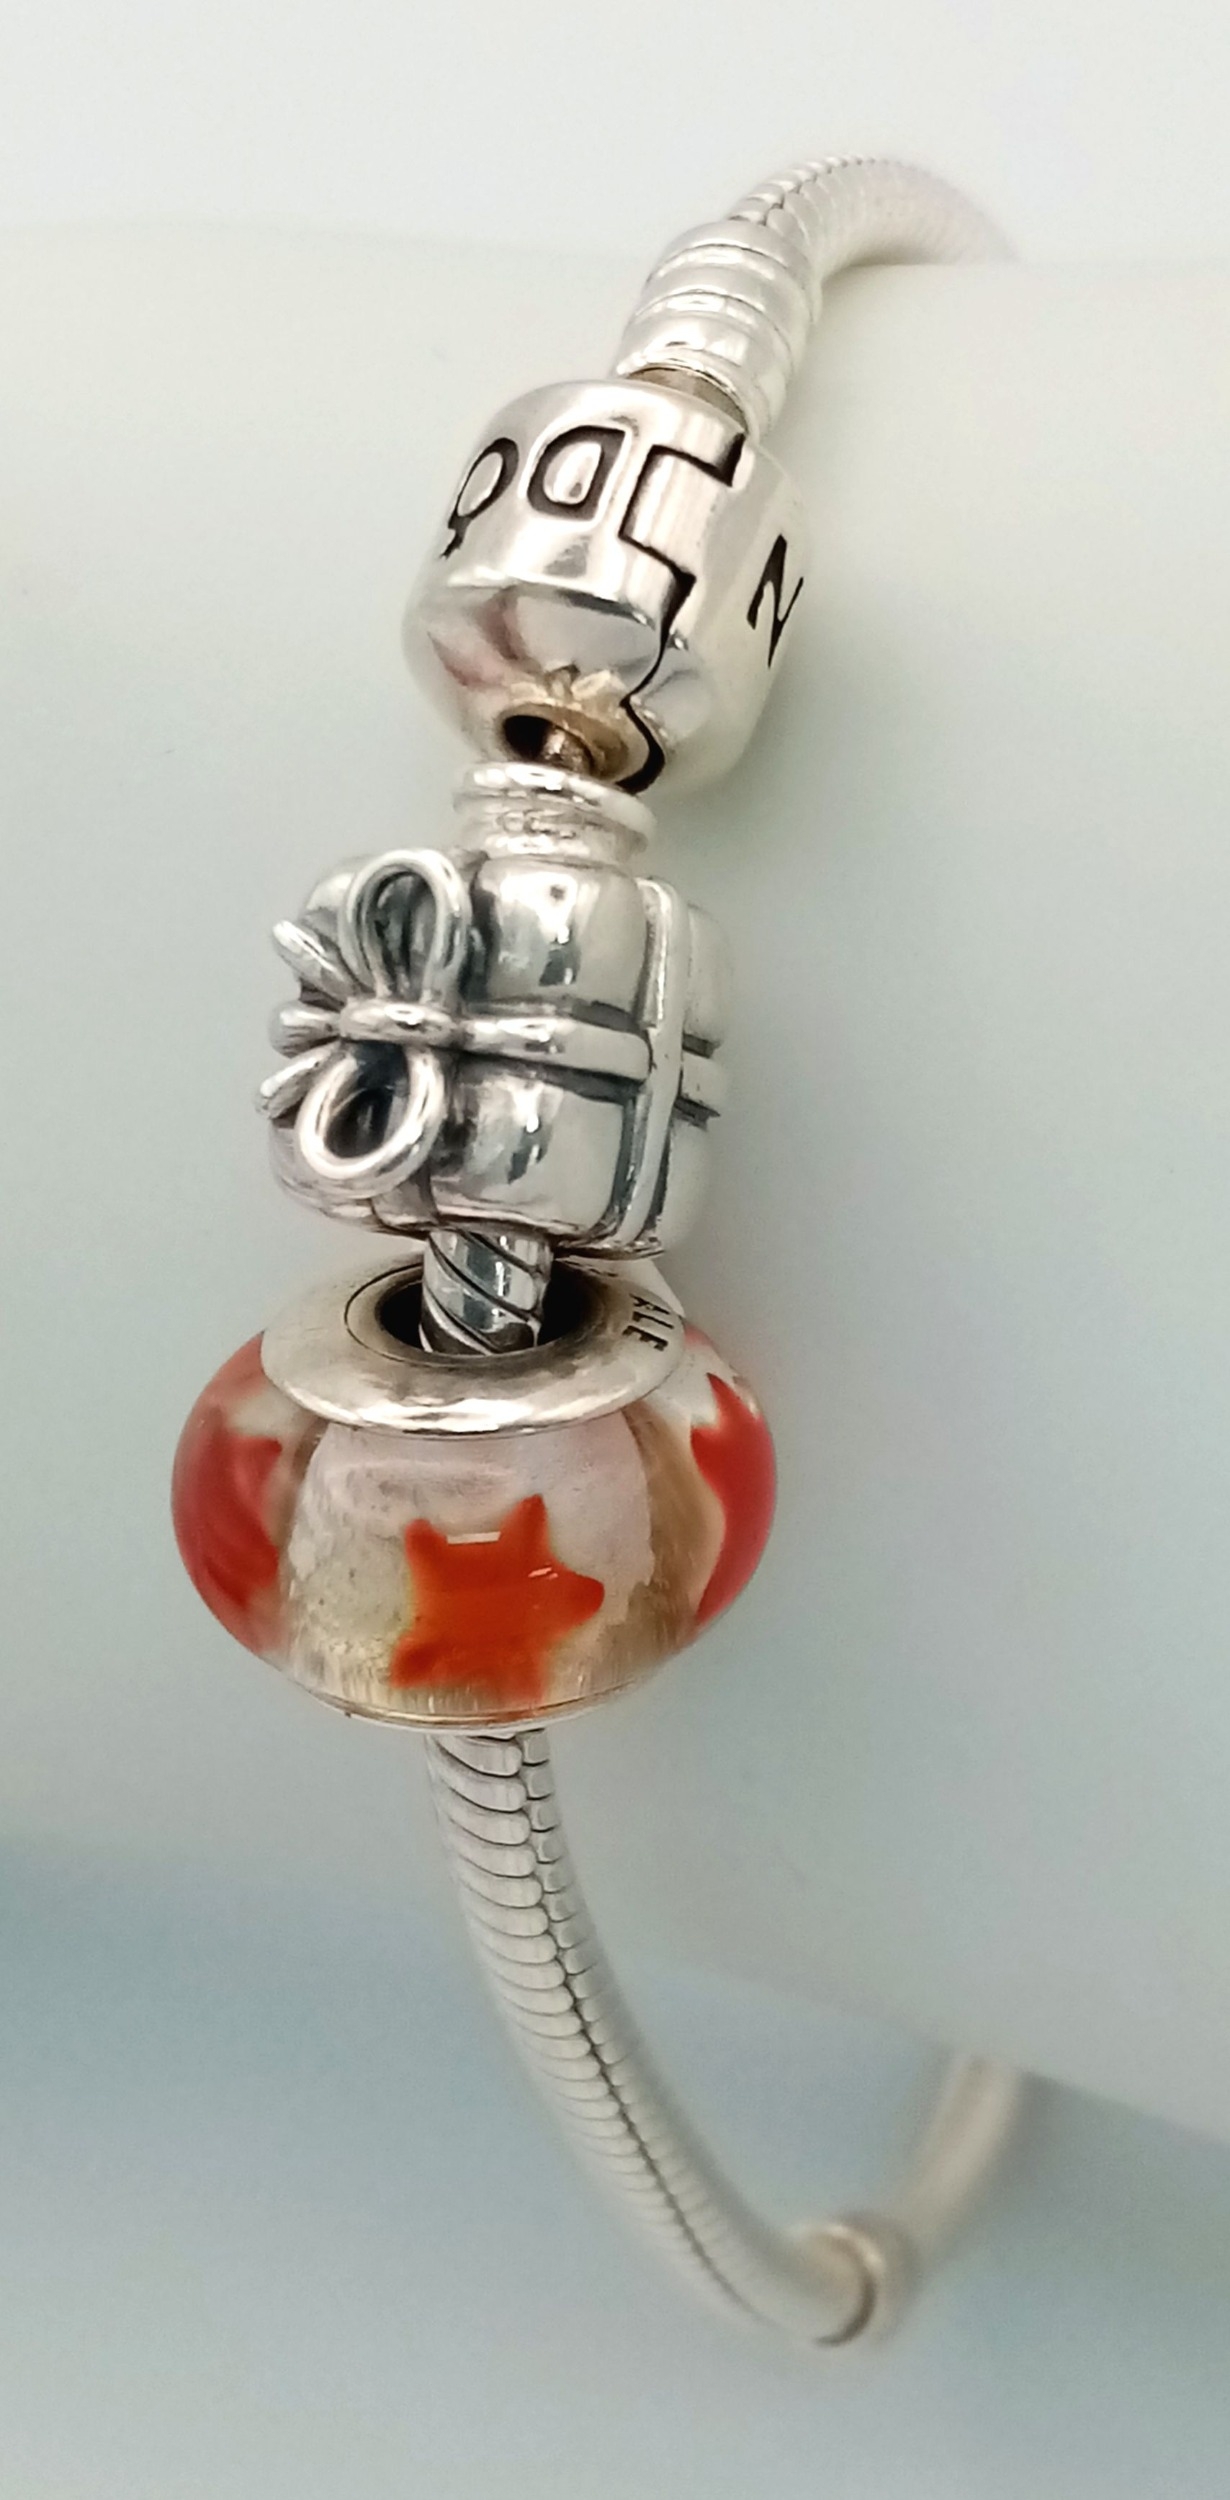 A Pandora Silver Charm Bracelet with Two Charms. 22g - Image 2 of 4